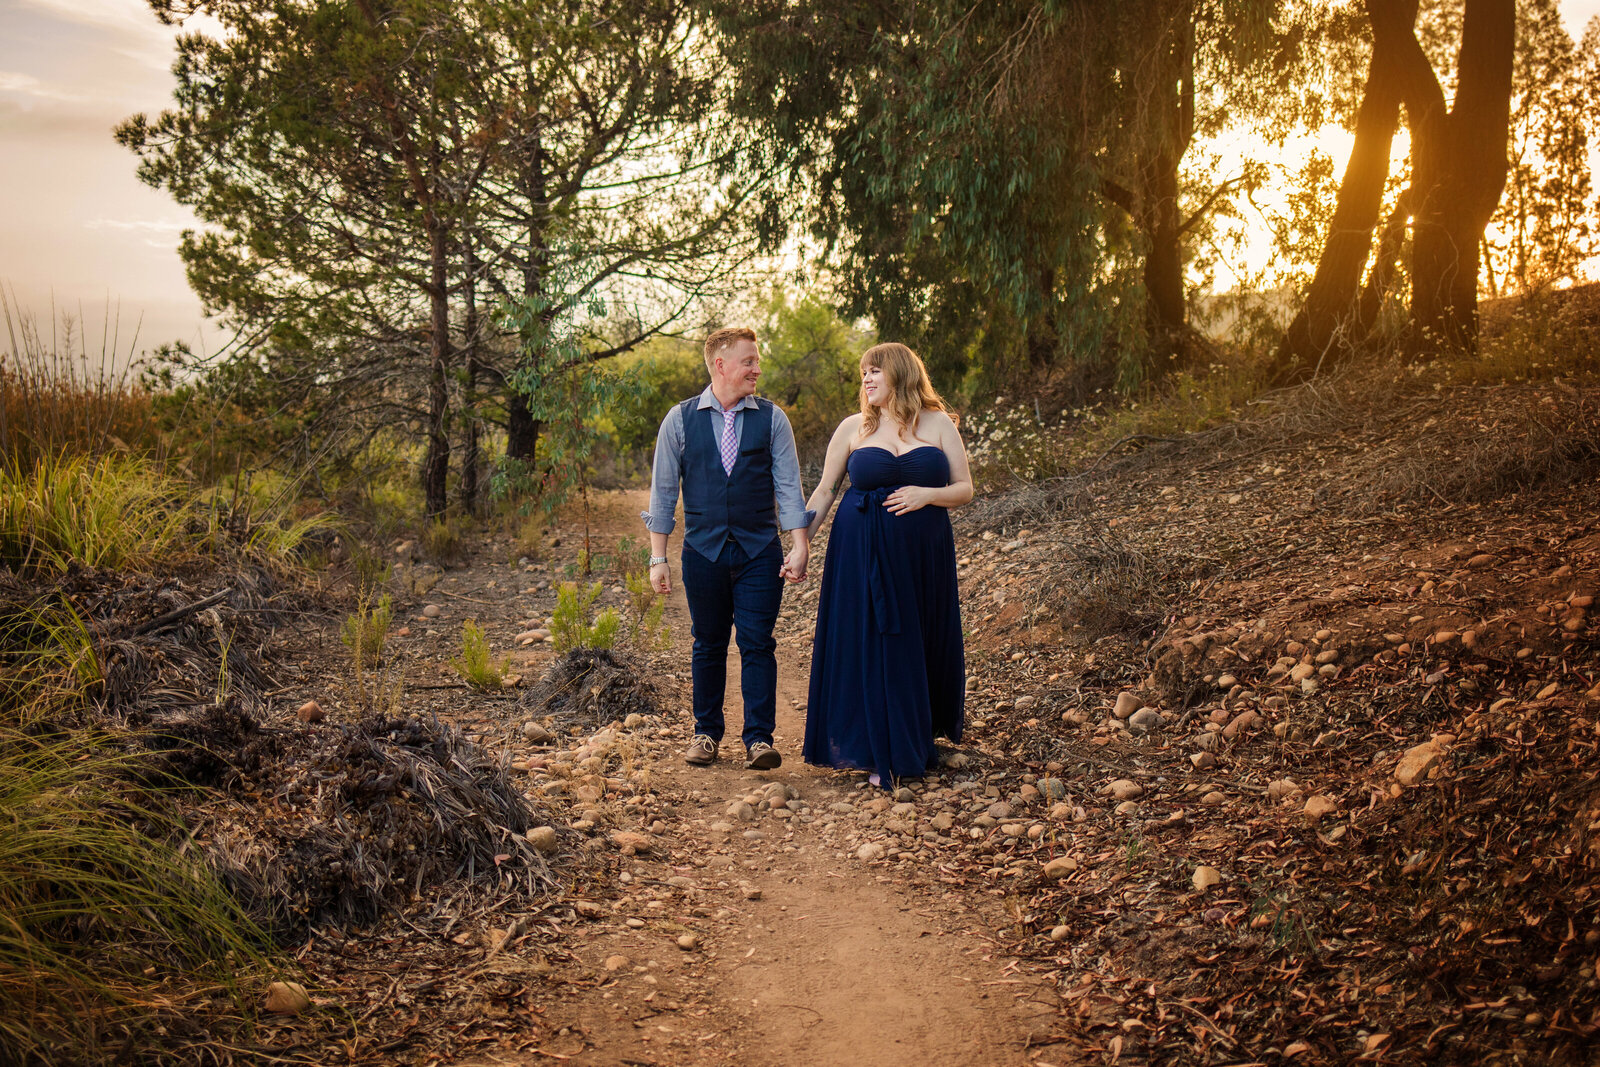 Maternity Photographer, a couple walks together on a trail ion nice attire, she is expecting